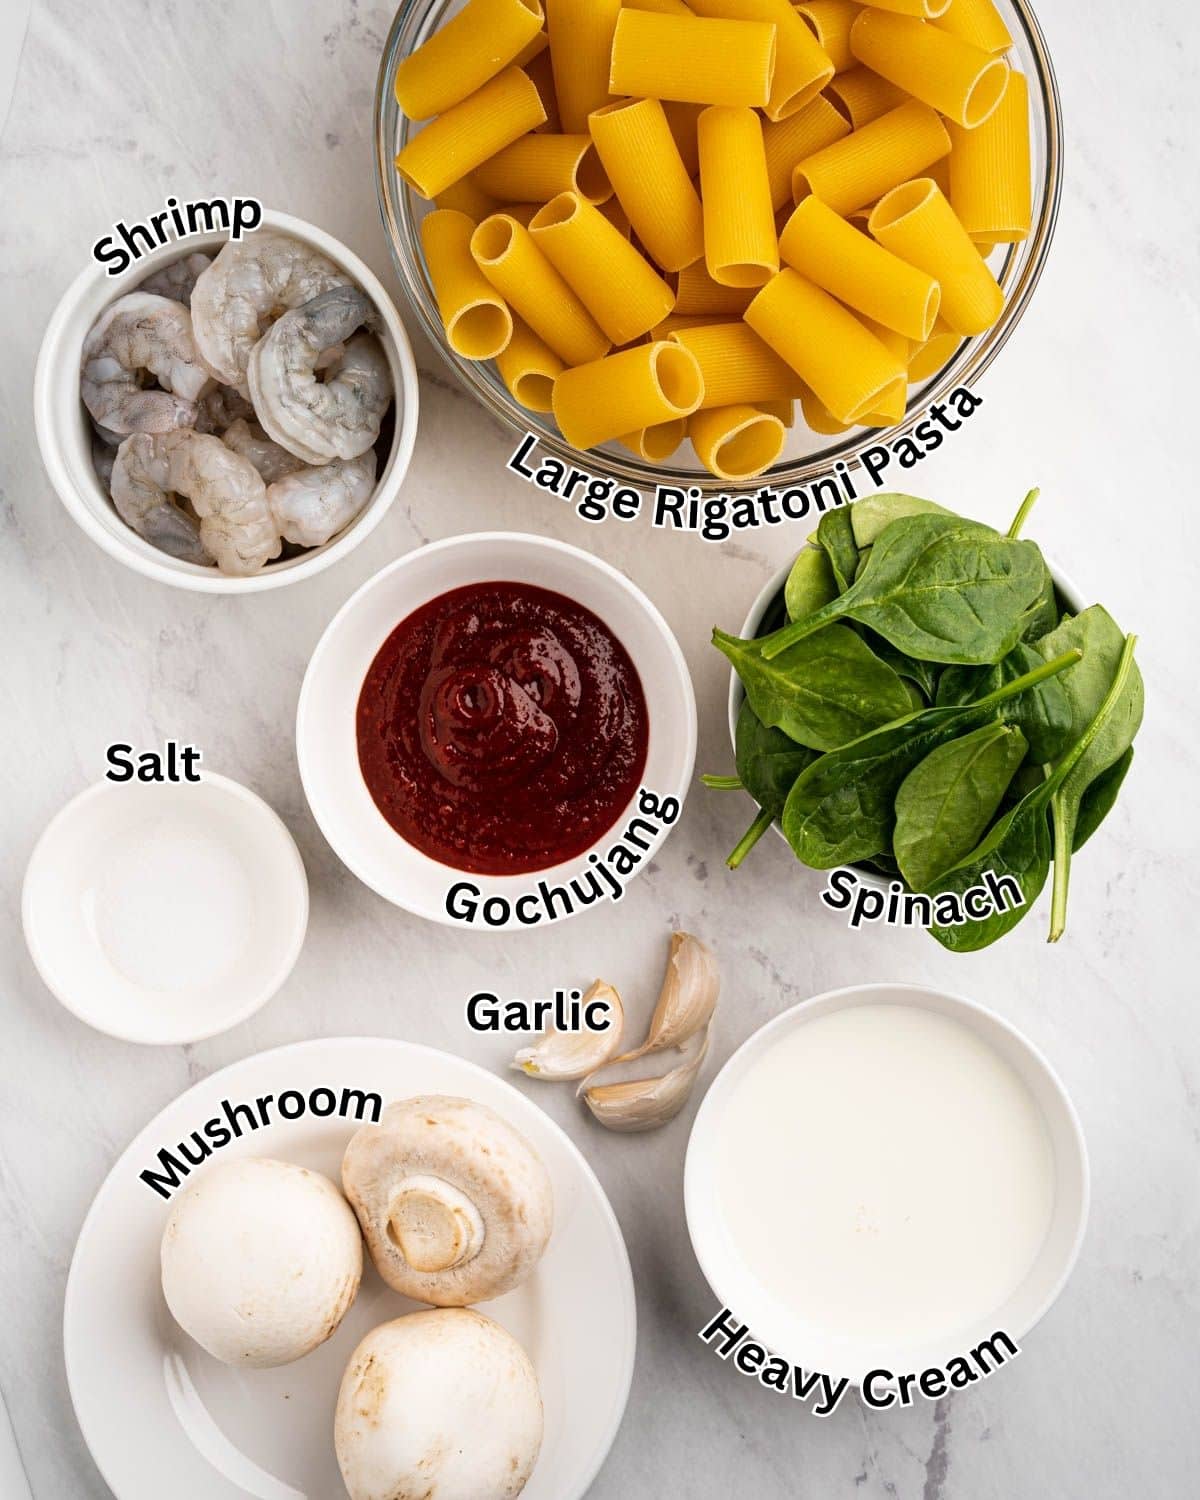 Labeled ingredients needed to make gochujang pasta with shrimp.